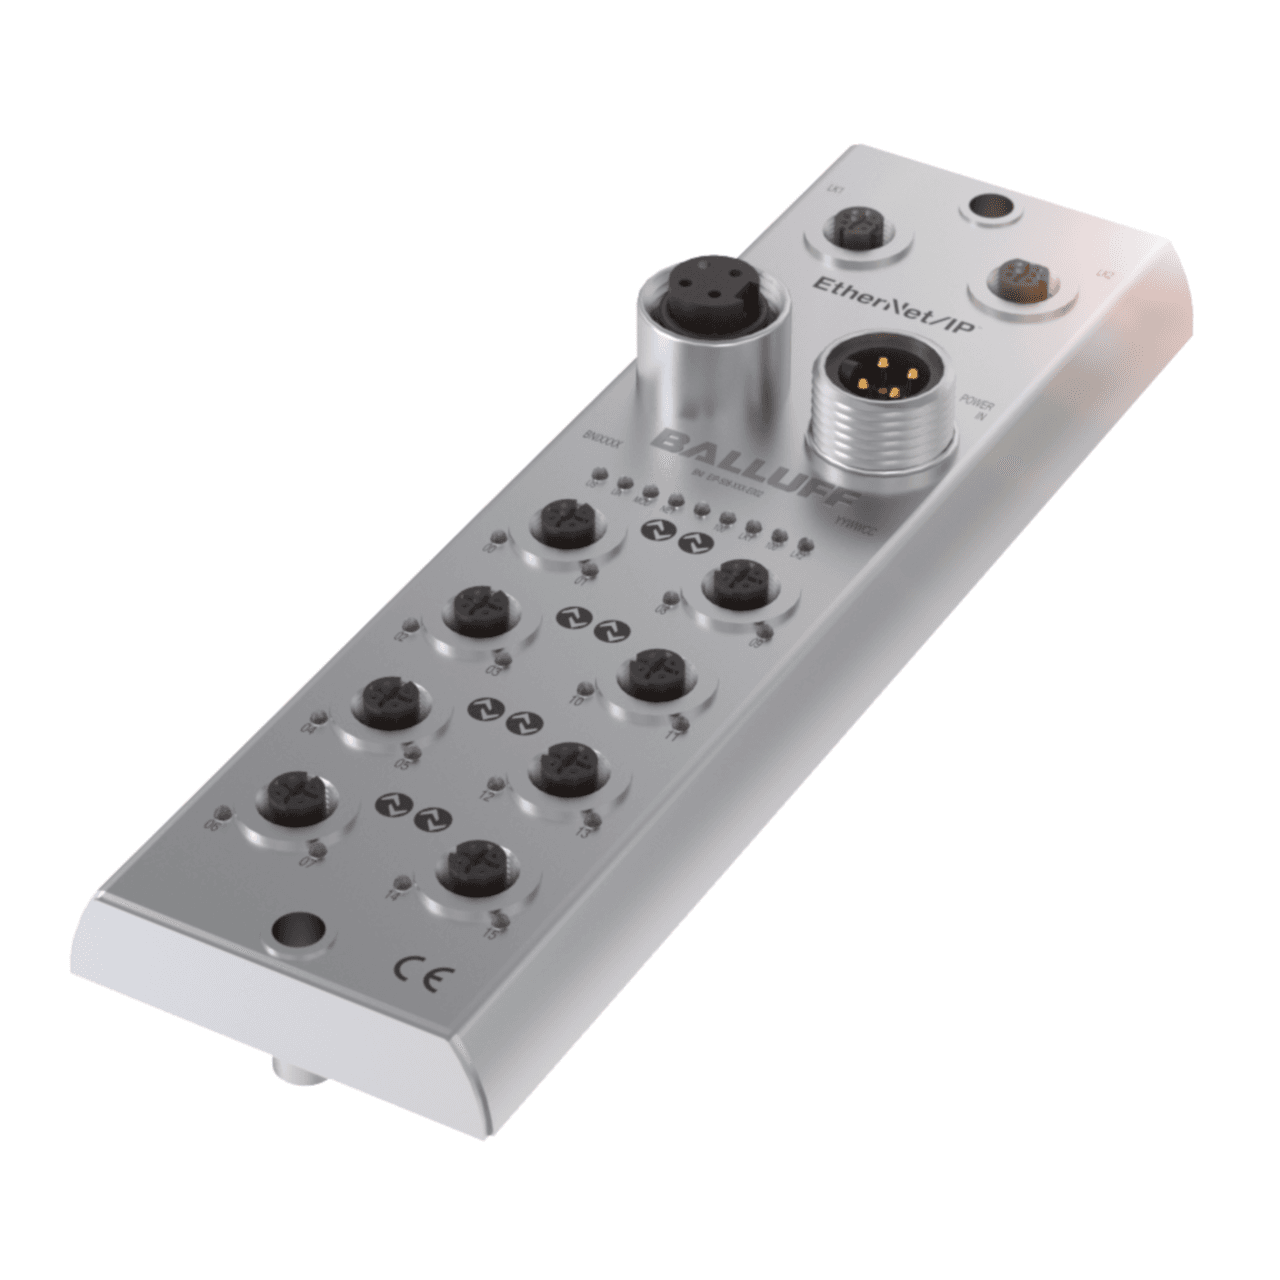 Balluff BNI0096 Network blocks for Ethernet/IP, Interface: EtherNet/IP, Operating voltage Ub: 18...30.2 VDC, Connection (COM 1): M12x1-Female, 4-pin, D-coded, Connection (COM 2): M12x1-Female, 4-pin, D-coded, Connection (supply voltage IN): 7/8"-Male, 4-pin, Connection (